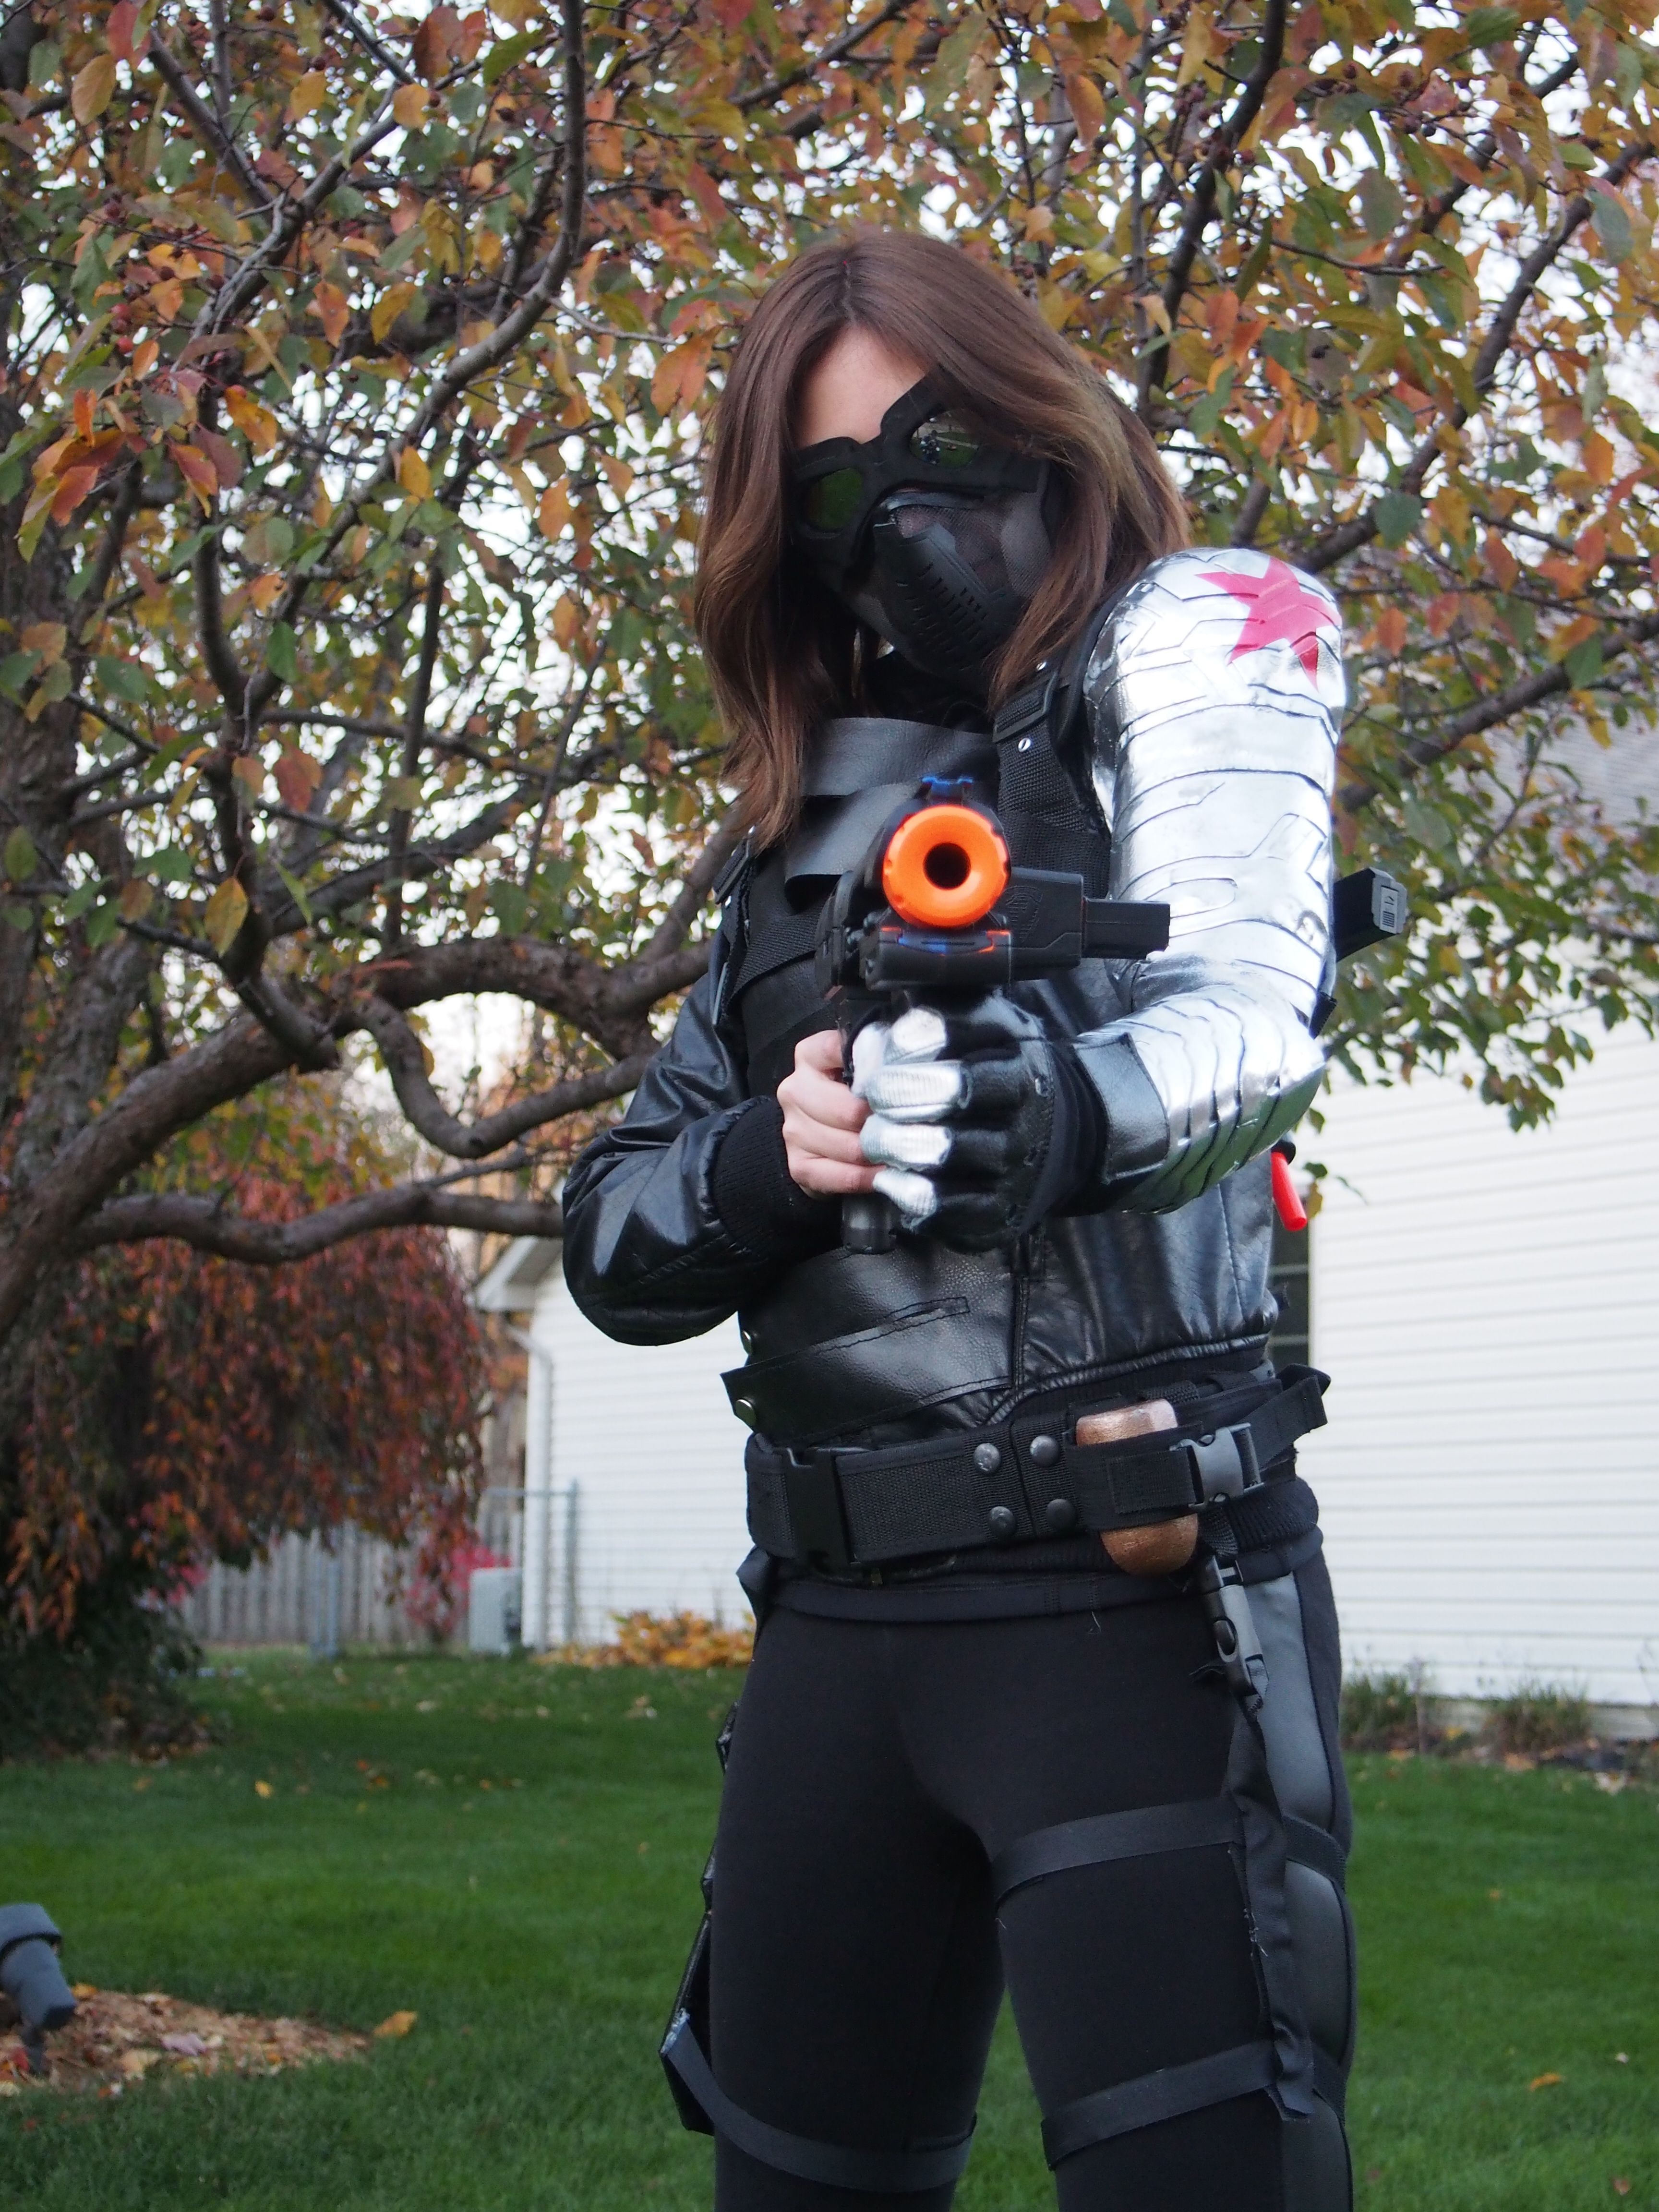 Brownie616 The Winter Soldier Costume for 2014 Halloween Contest